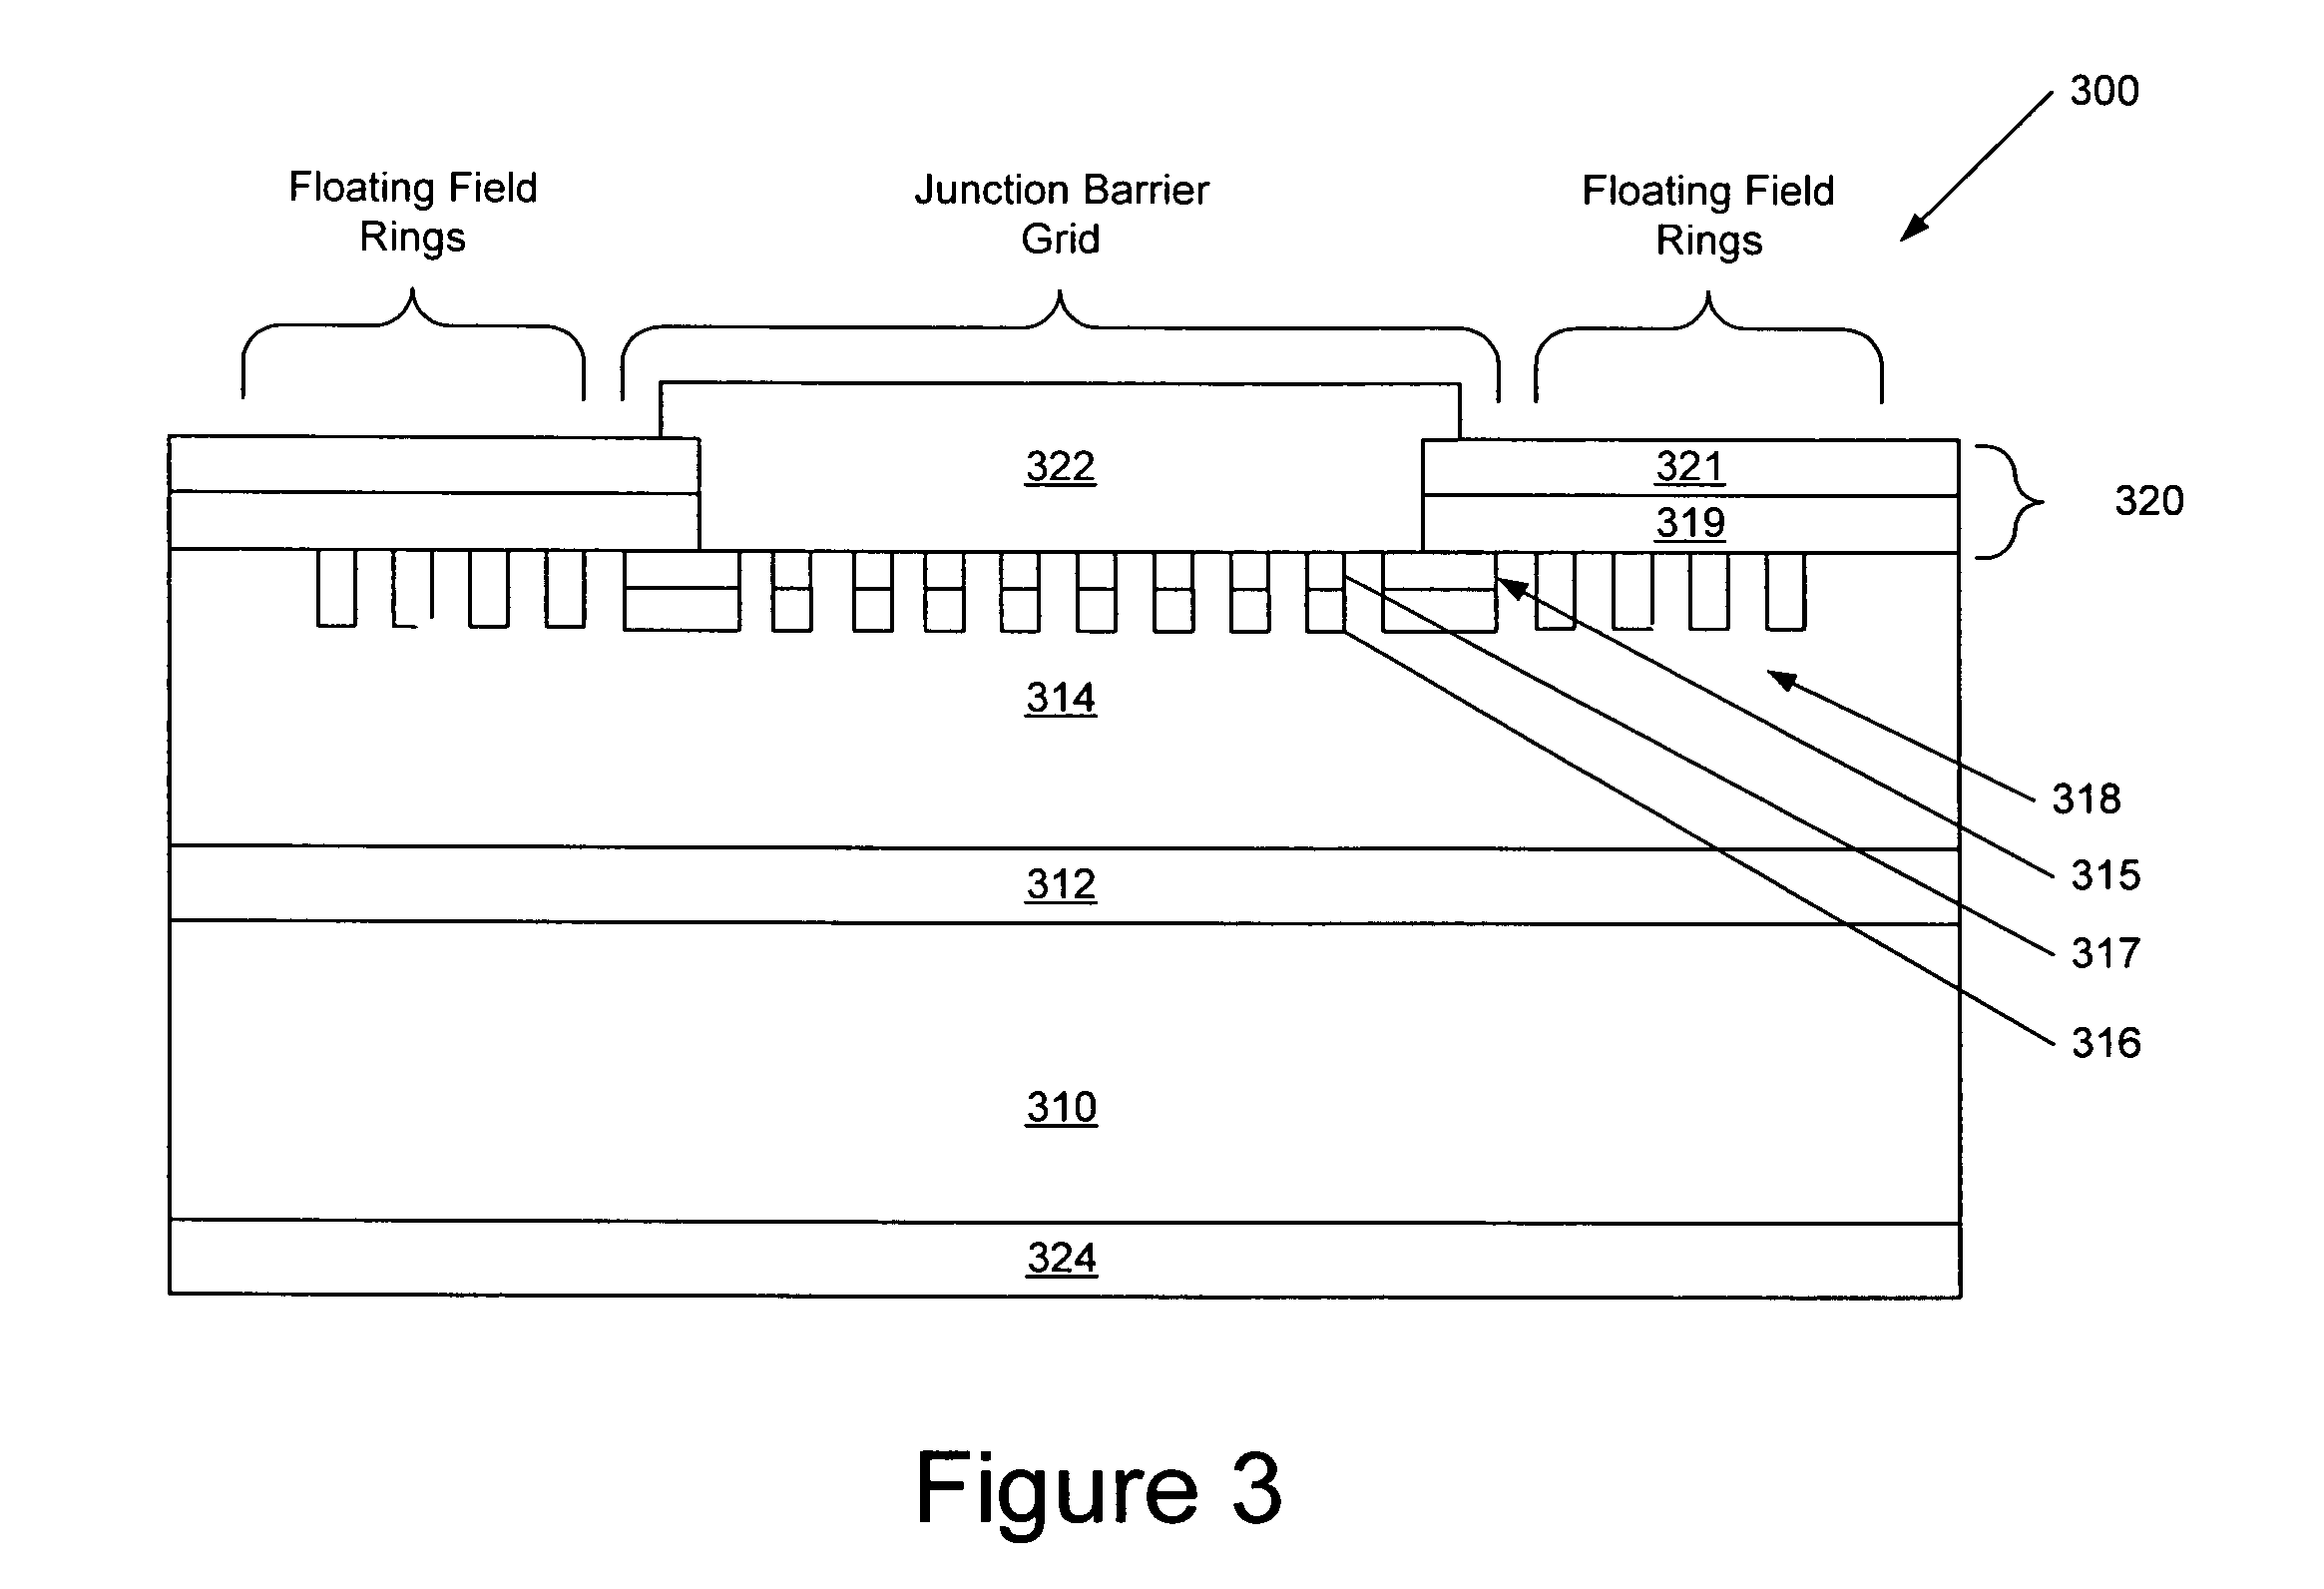 Silicon carbide junction barrier Schottky diodes with suppressed minority carrier injection